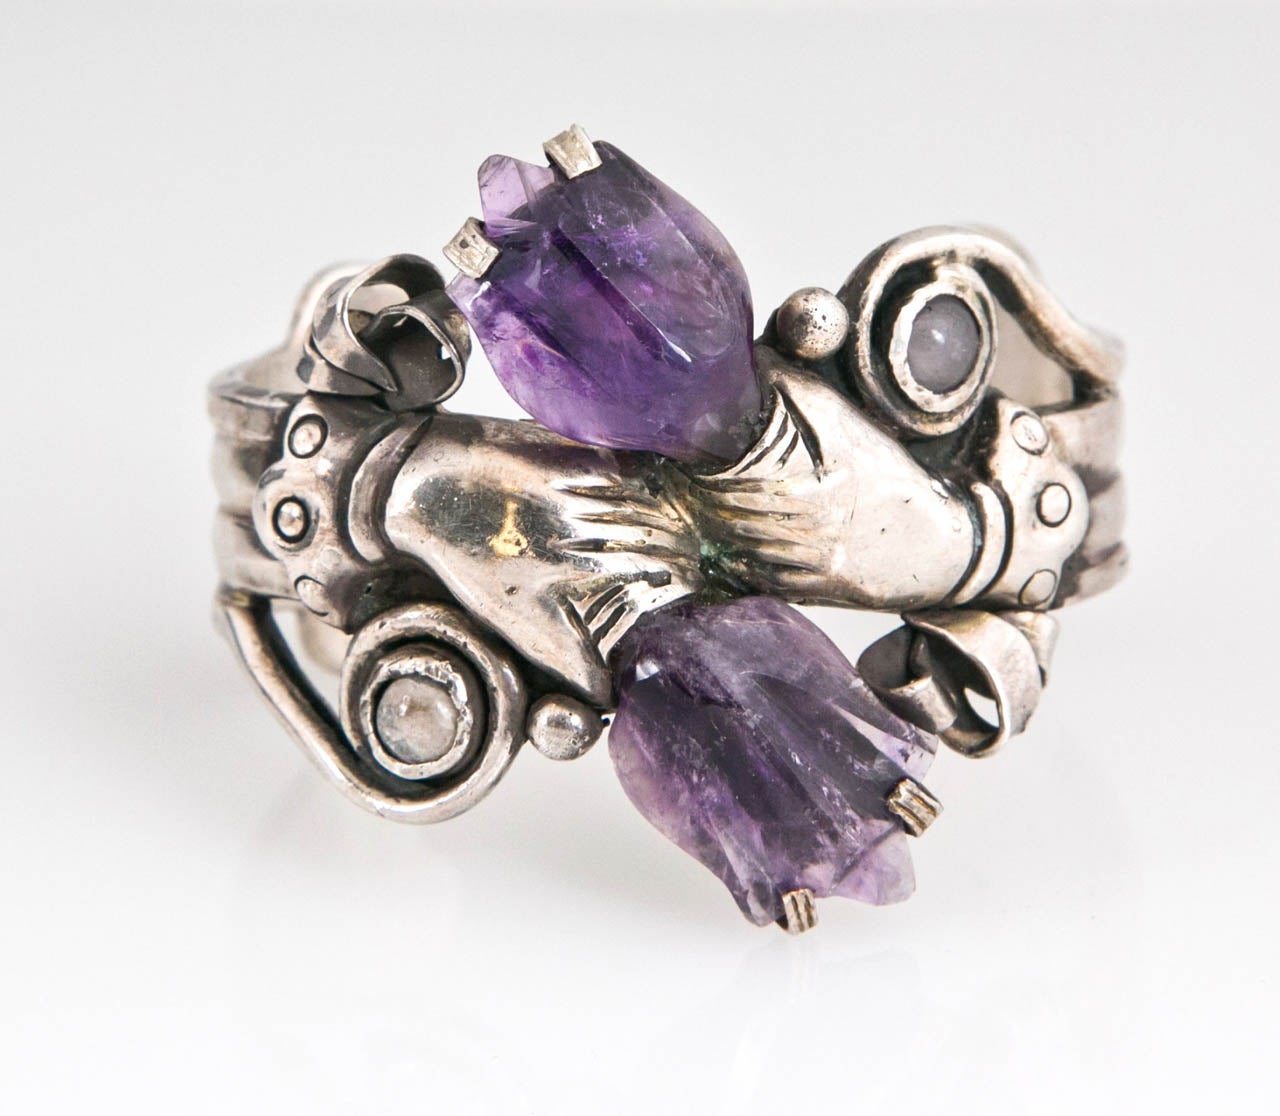 William Spratling is the father of Mexican silver- This bracelet is a book piece
which means that it has been published in books of great jewelry design.It has two markings for Silver... Spratling work with amethyst began in 1939..
Amethyst quartz